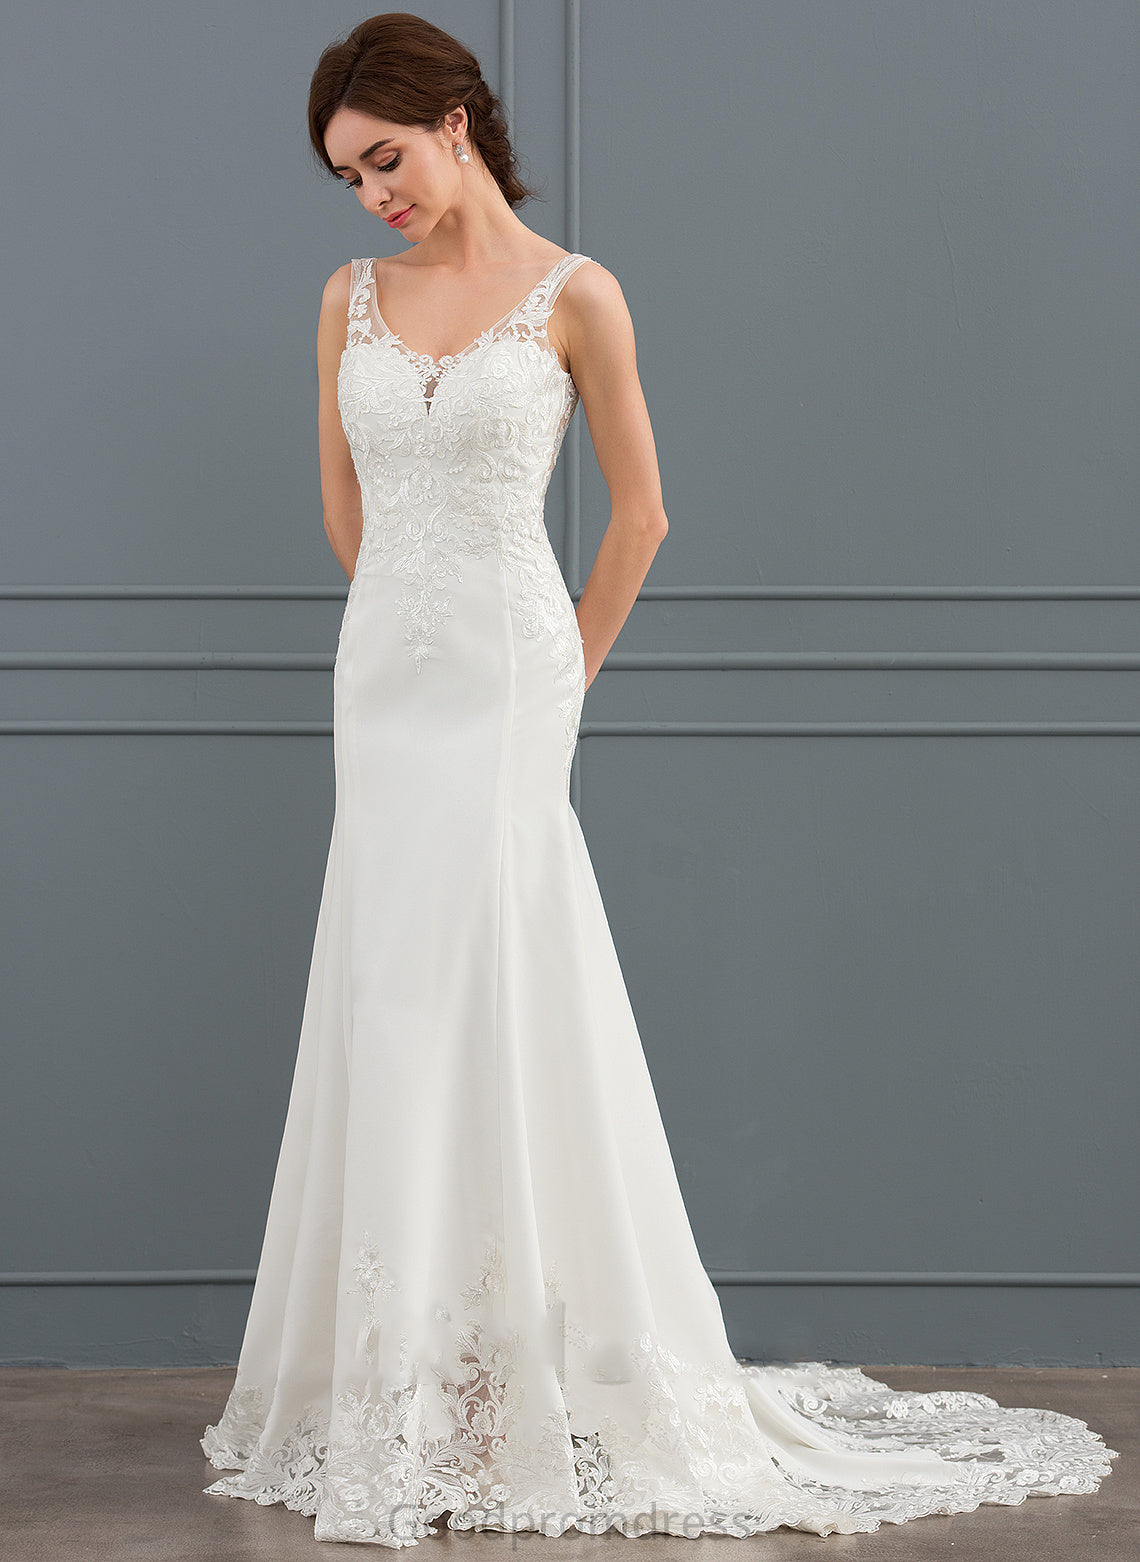 Dress Wedding Dresses V-neck Sequins Chasity Court Crepe Trumpet/Mermaid Stretch Train Wedding Lace With